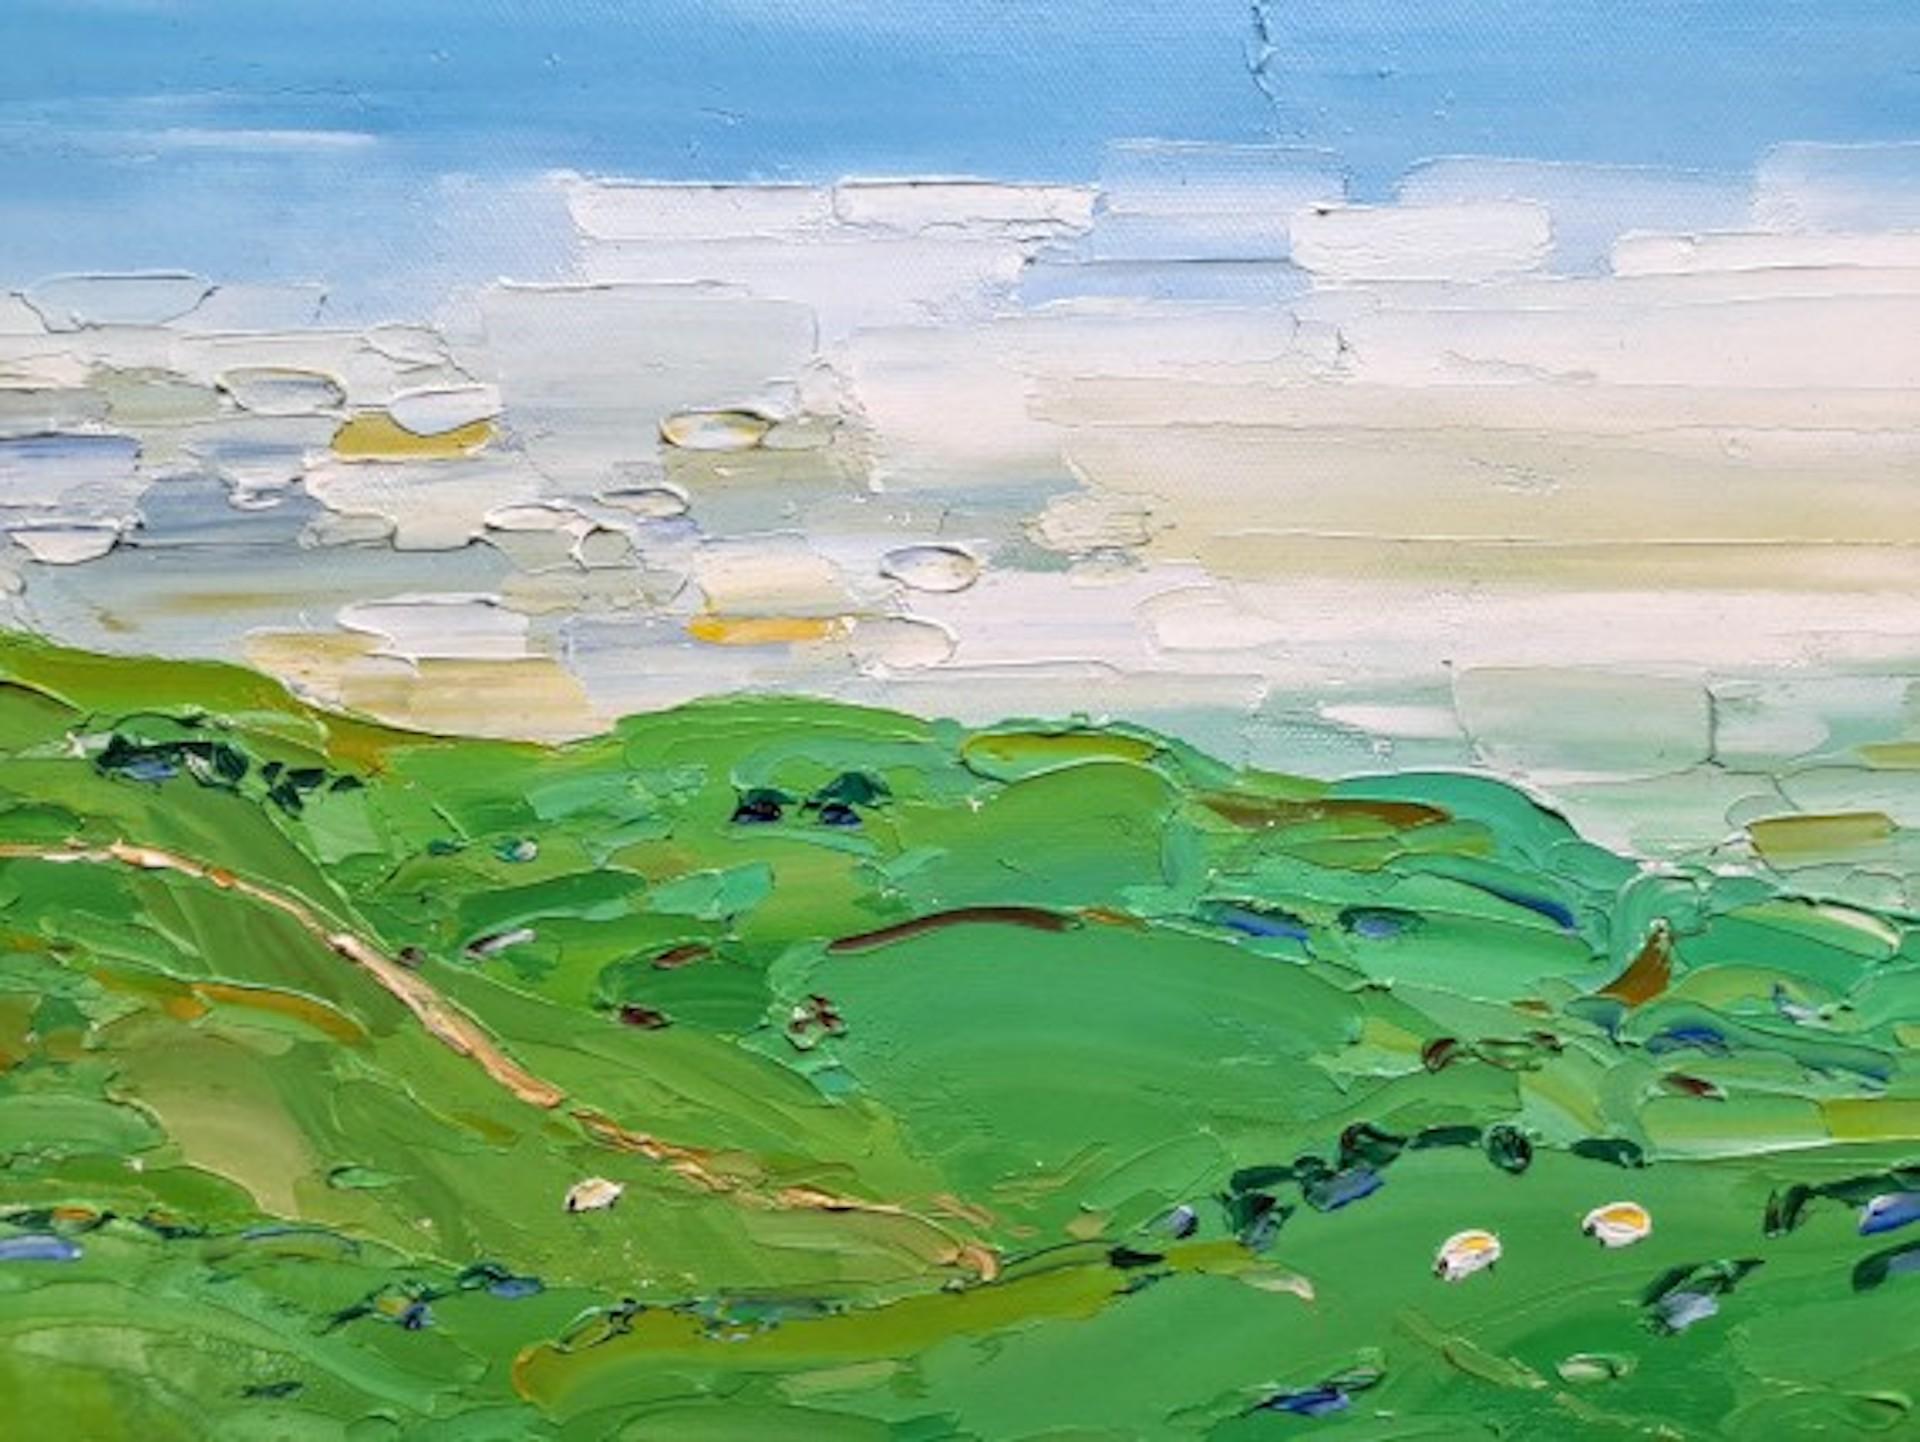 Sheep on Cleeve Hill by Georgie Dowling [2021]
original

Oil paint on canvas

Image size: H:30 cm x W:48 cm

Complete Size of Unframed Work: H:30 cm x W:48 cm x D:2cm

Sold Unframed

Please note that insitu images are purely an indication of how a